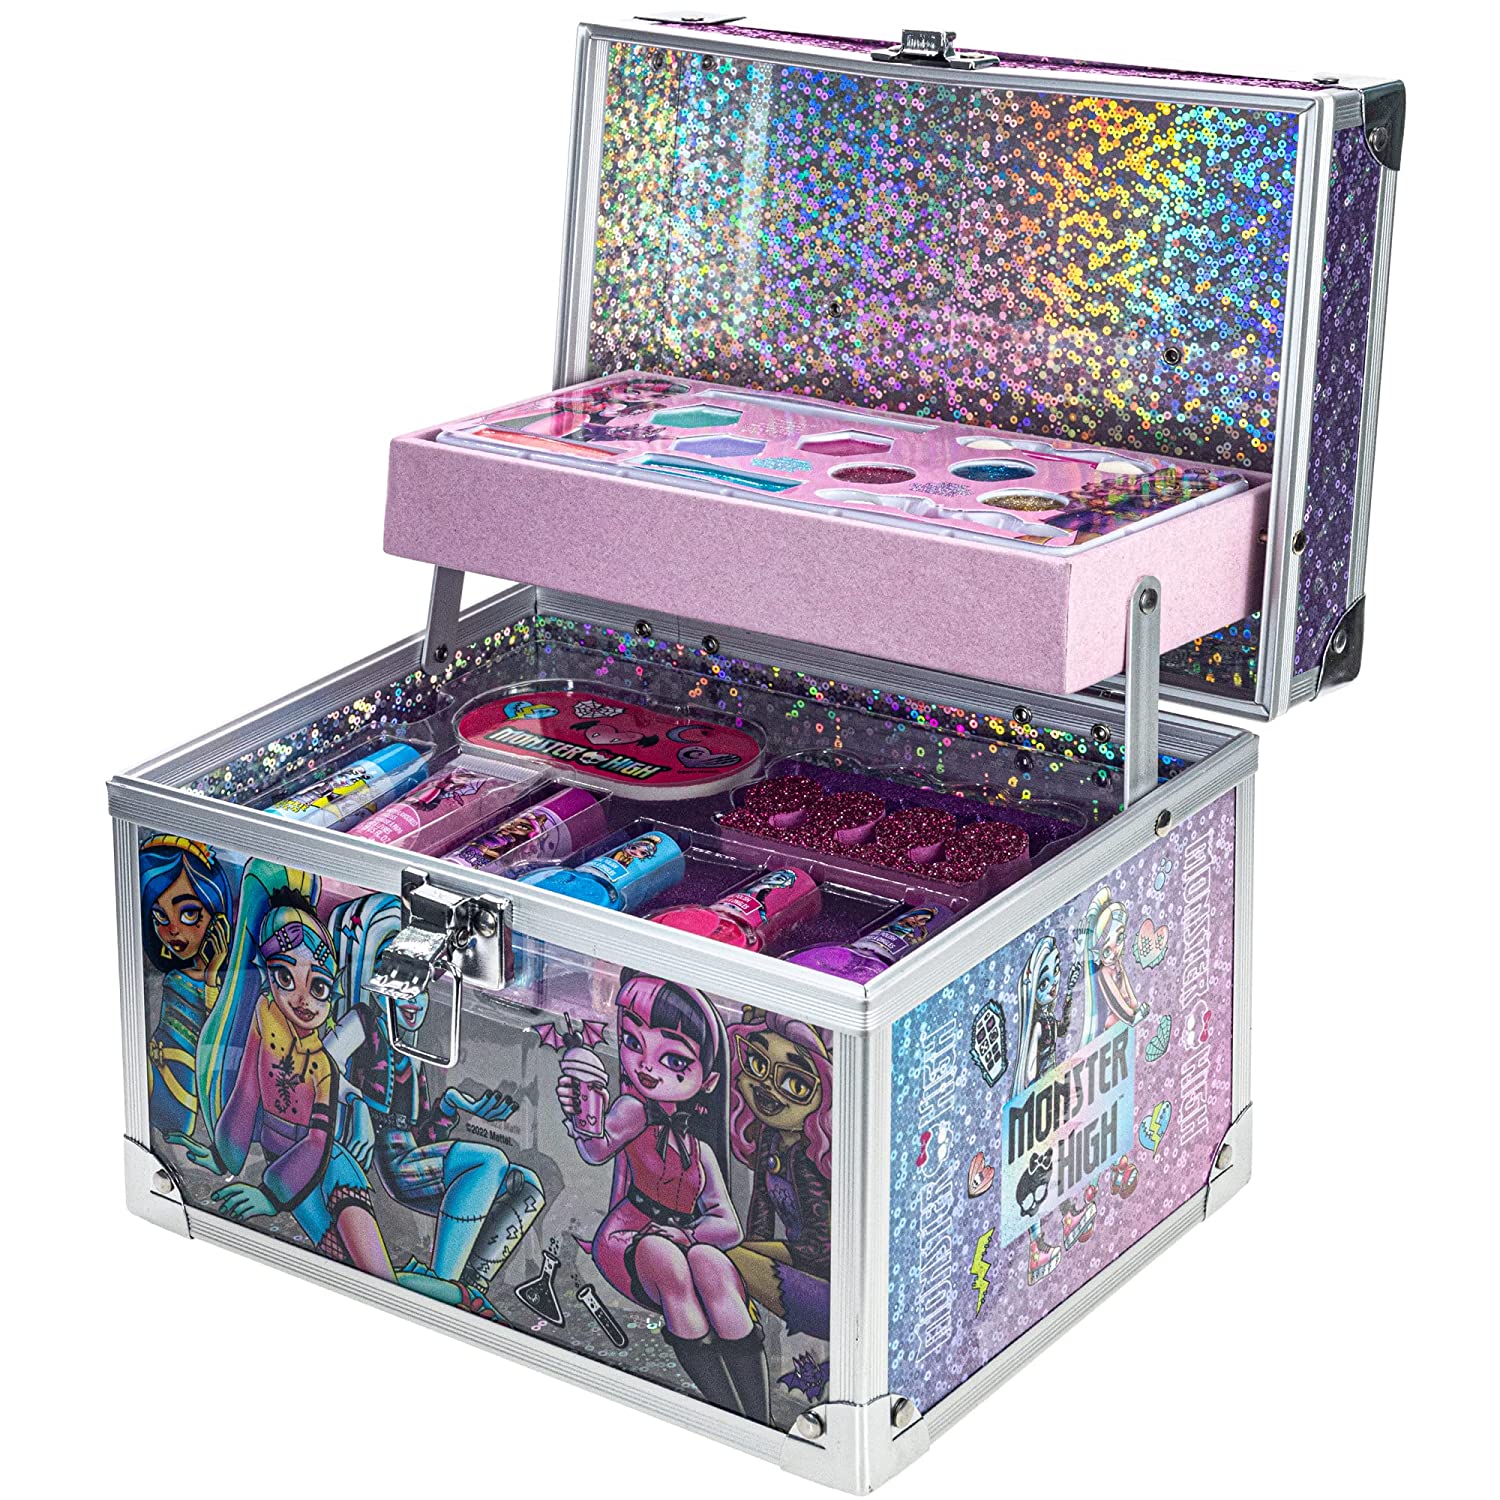 Townley Girl Train Case Cosmetic Makeup Set for Girls